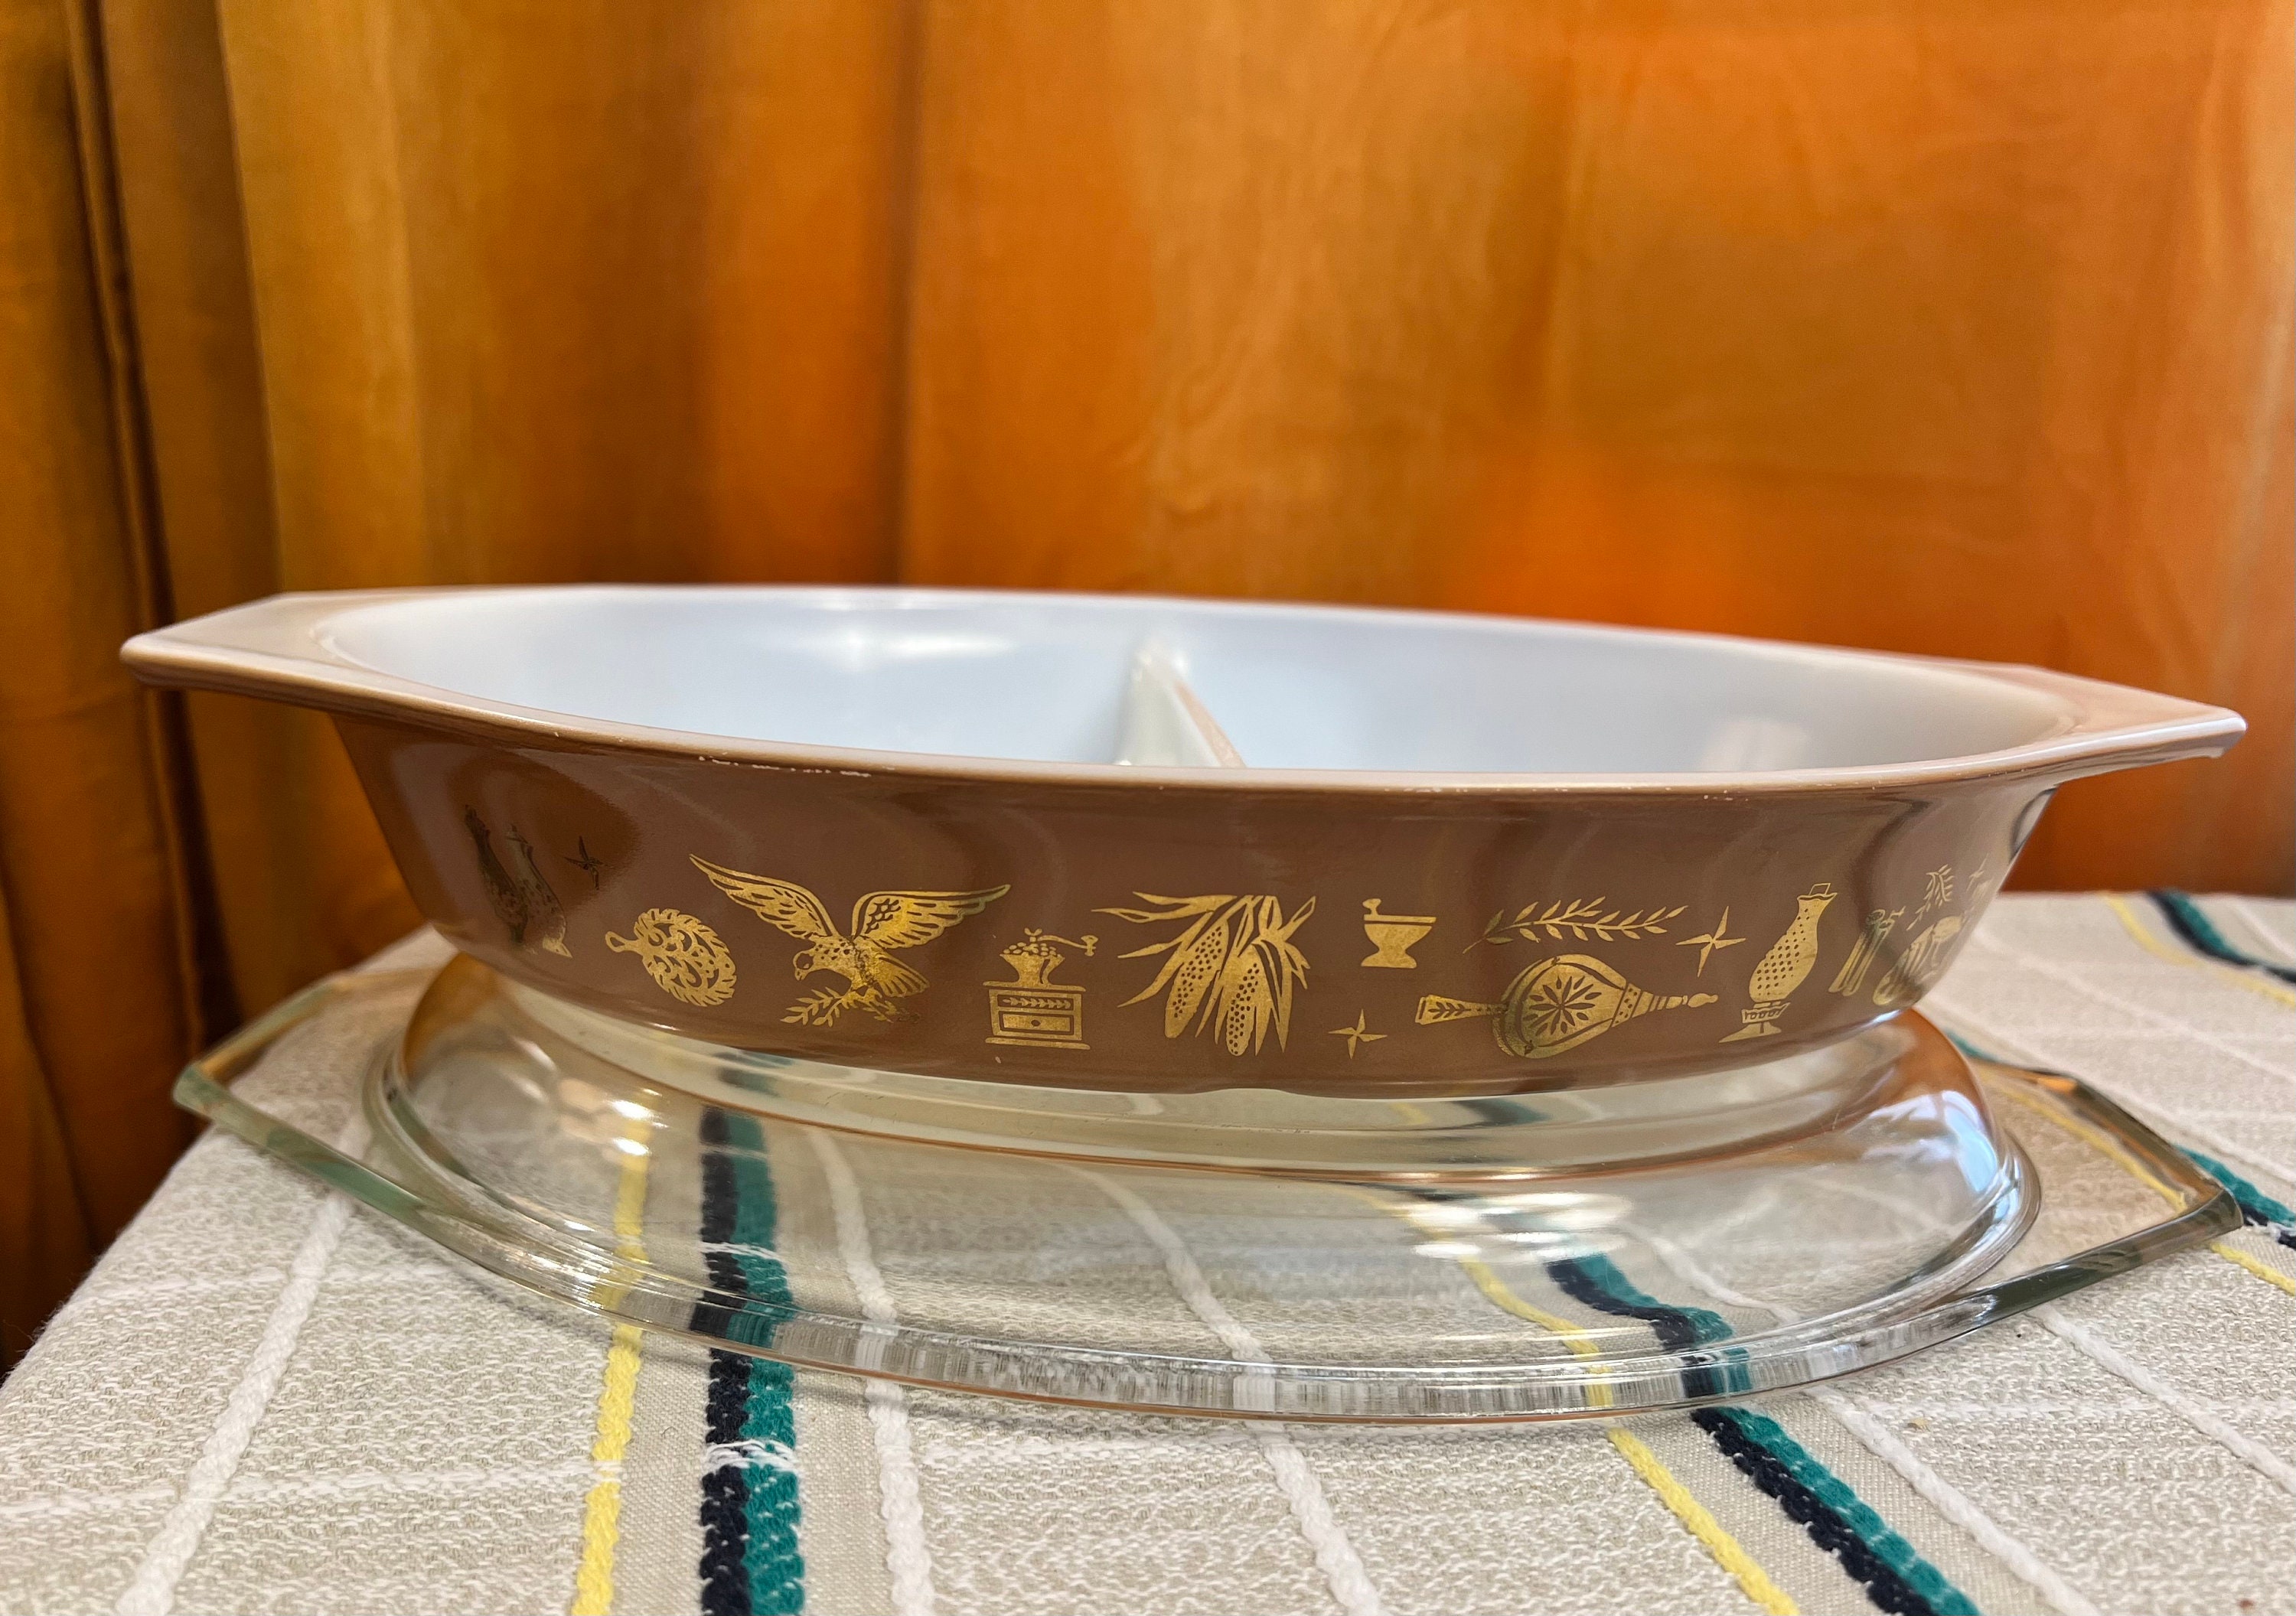 Pyrex Americana Divided Baking Serving Dish With Glass Lid Vintage Pyrex,  Americana Pattern, Divided Baking Serving Dish, Glass Cover 